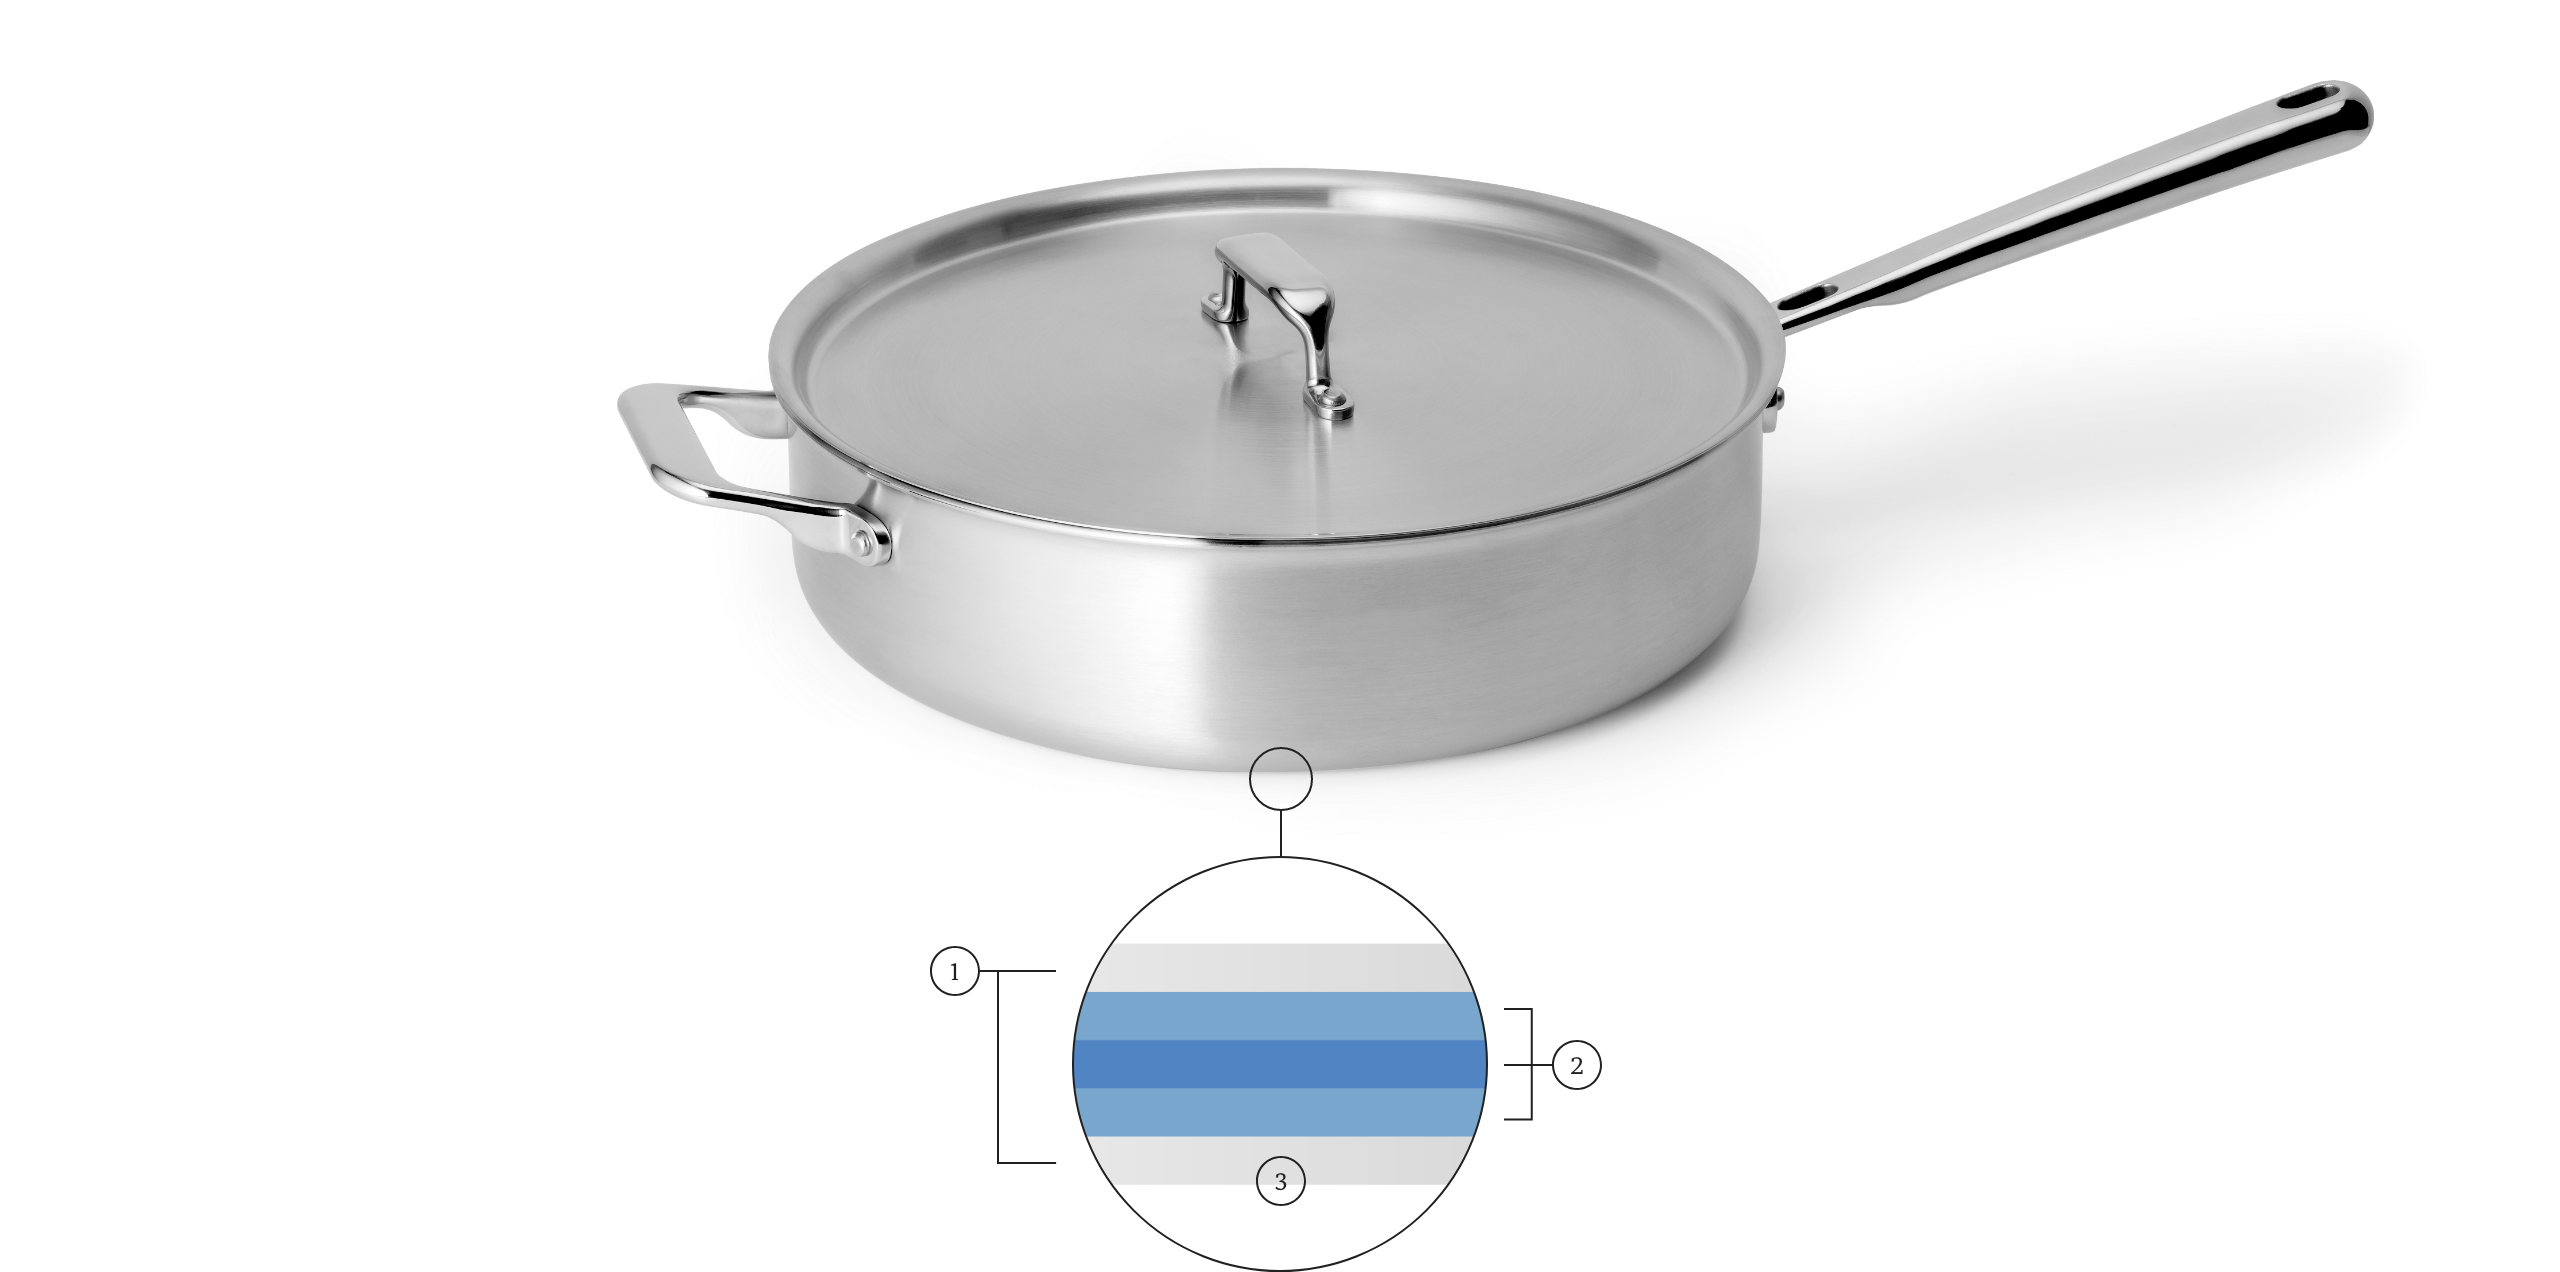 The Misen Saute is a durably constructed 5-ply pan with optimal heat conduction & retention that will last a lifetime.